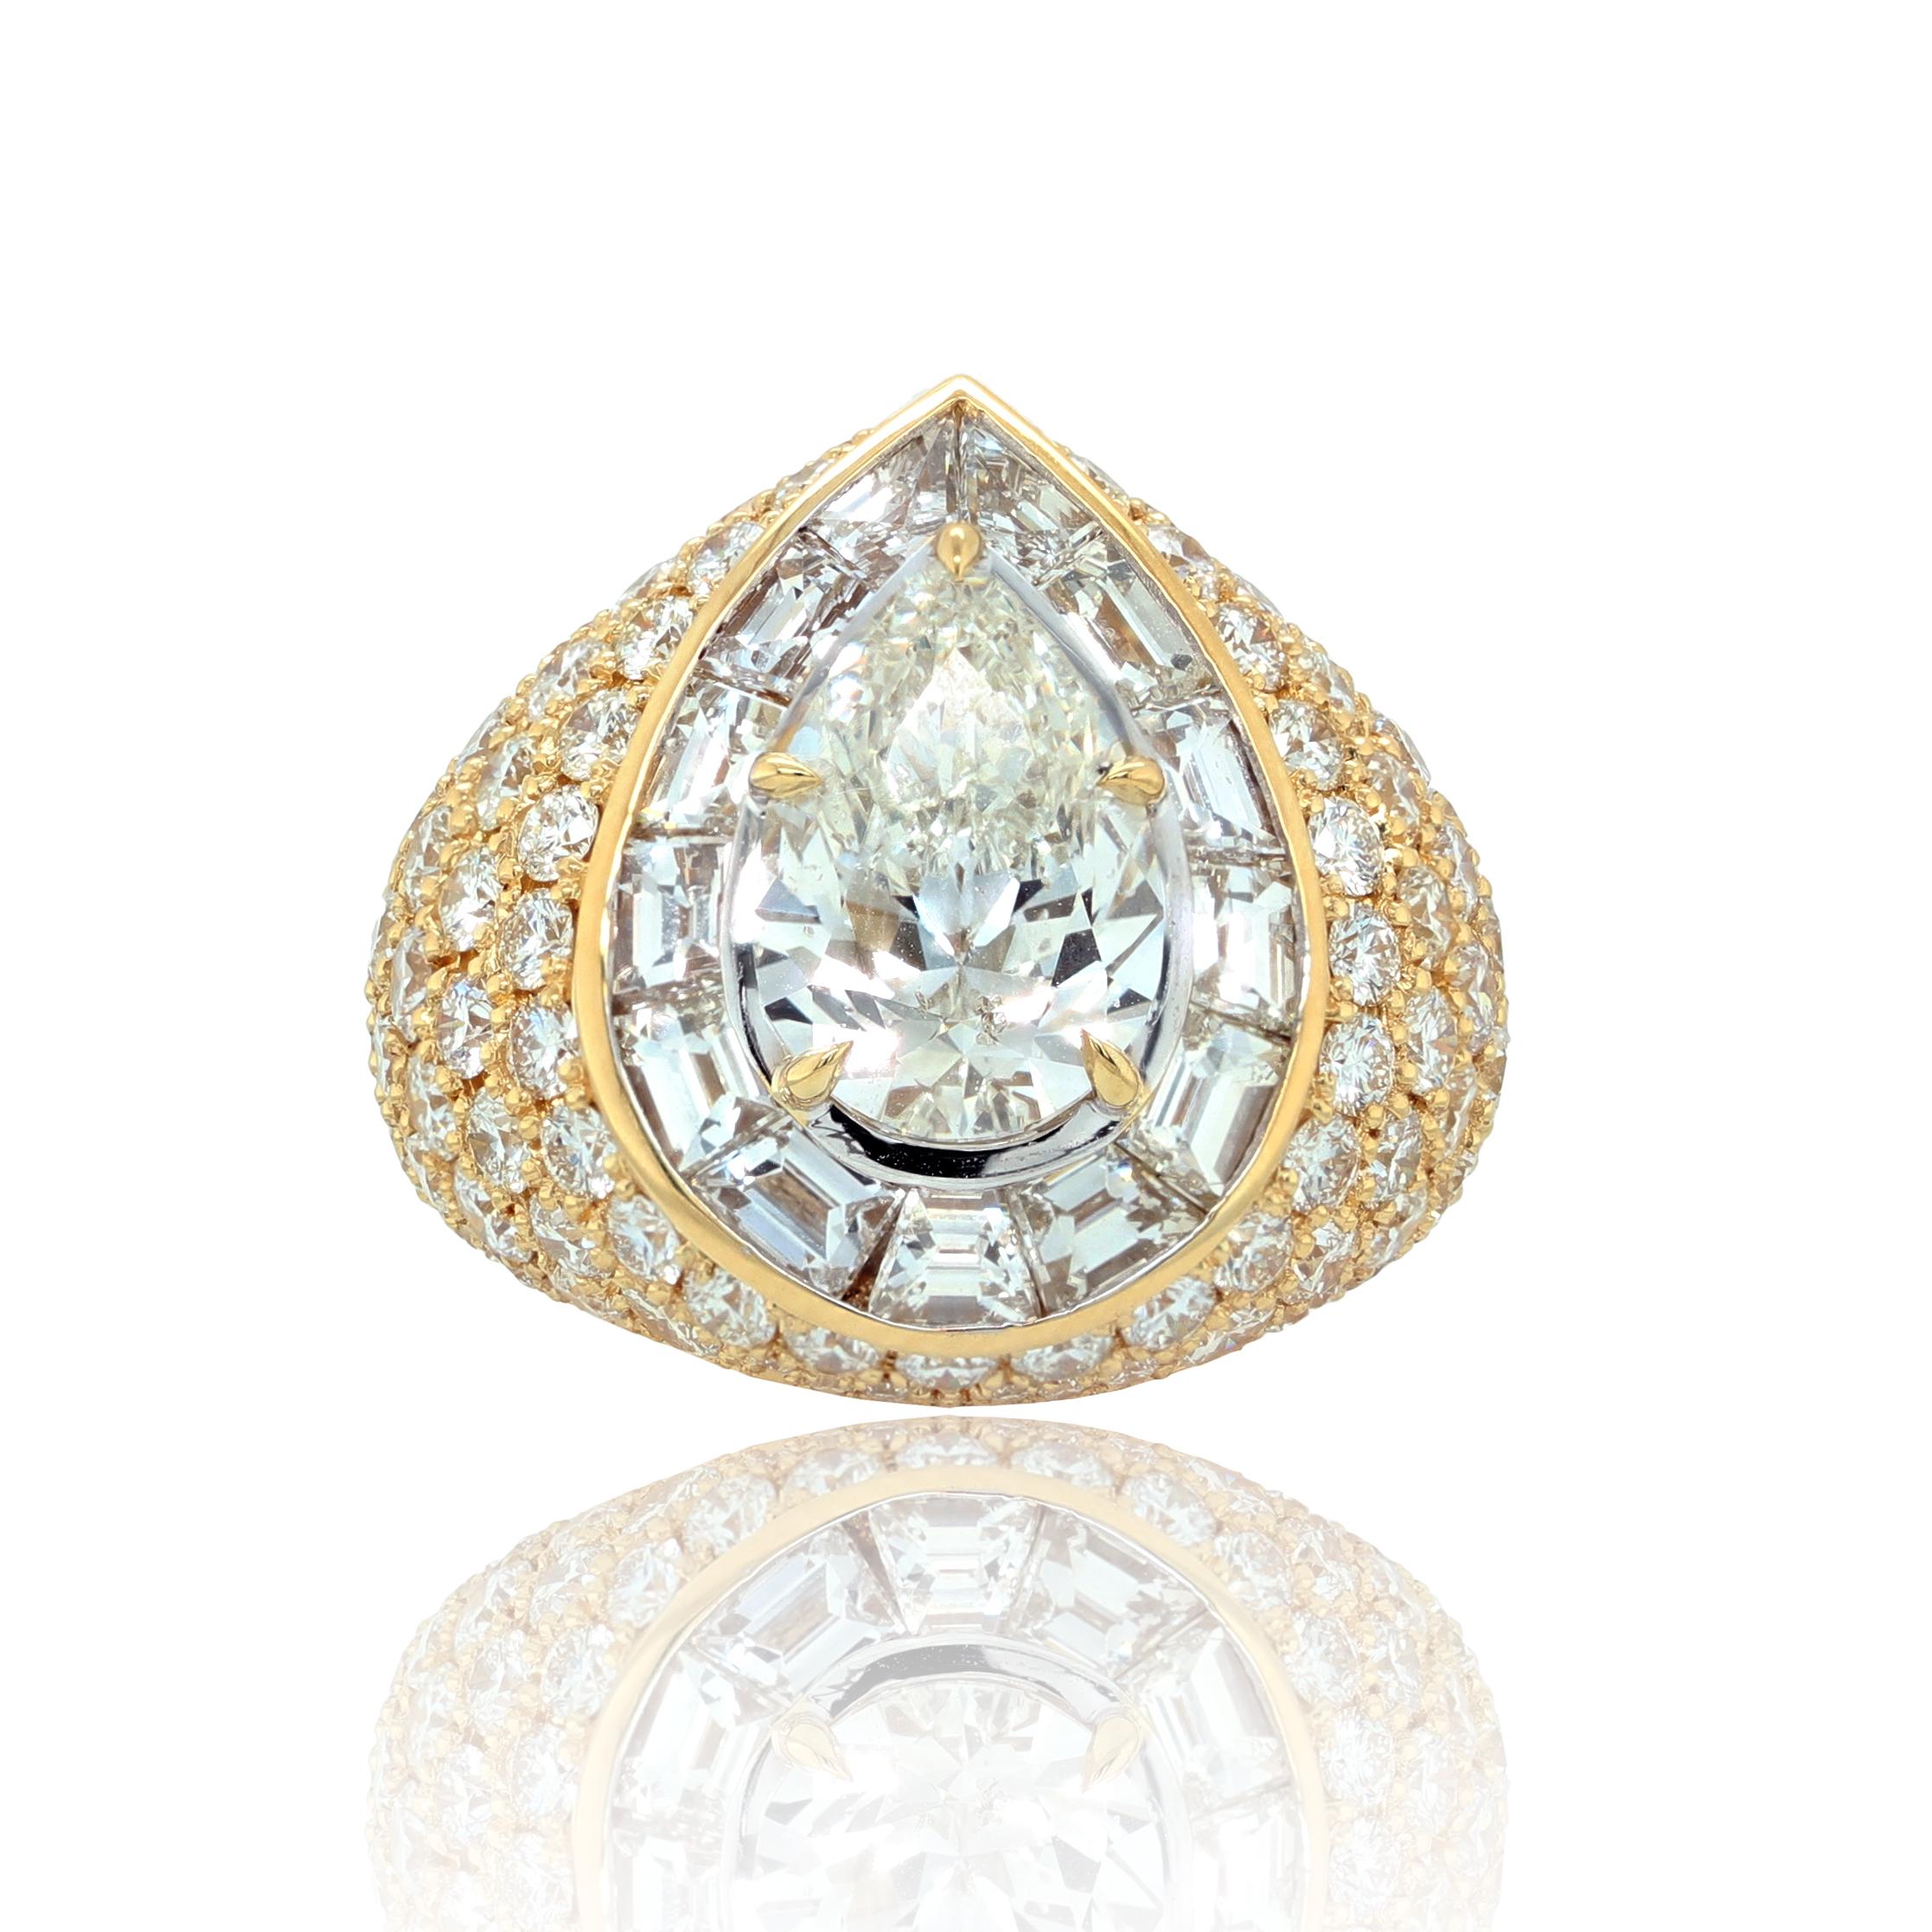 18kt yellow gold pear shape diamond ring center stone 3.50ct G-SI2 GIA certified (psc274) in a emerald halo setting and round diamonds on the side with total weight of 8.30 ct 
